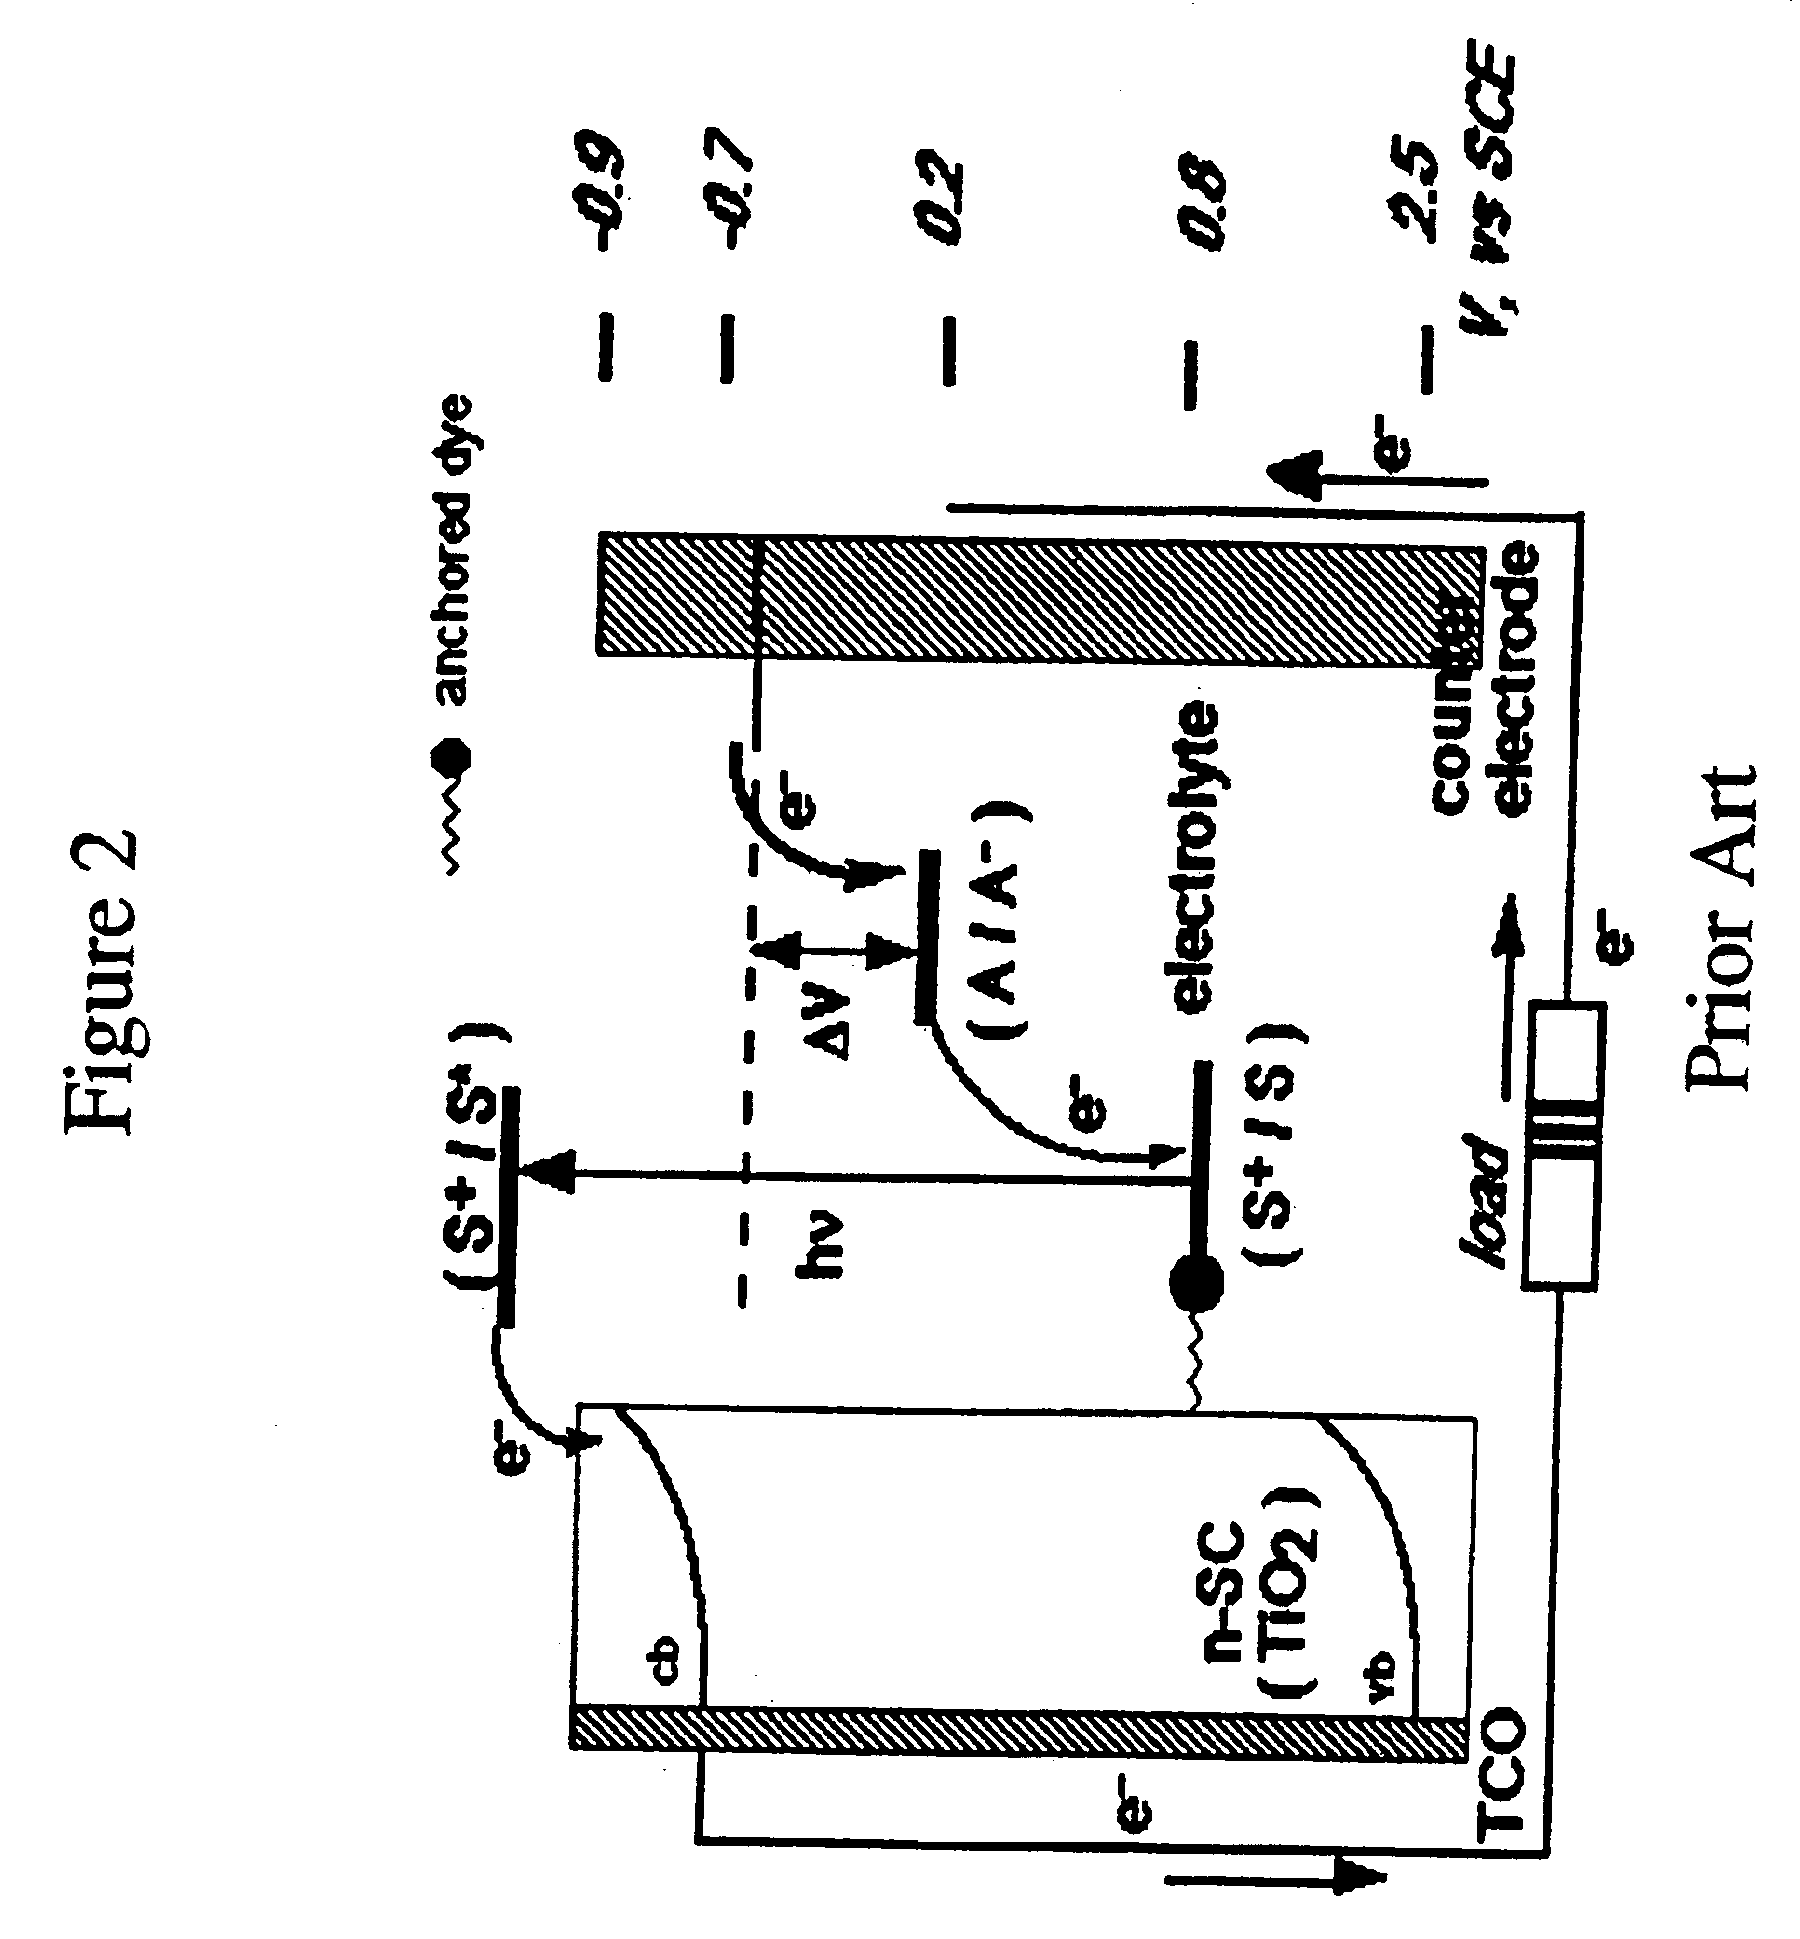 Apparatus and method for photovoltaic energy production based on internal charge emission in a solid-state heterostructure